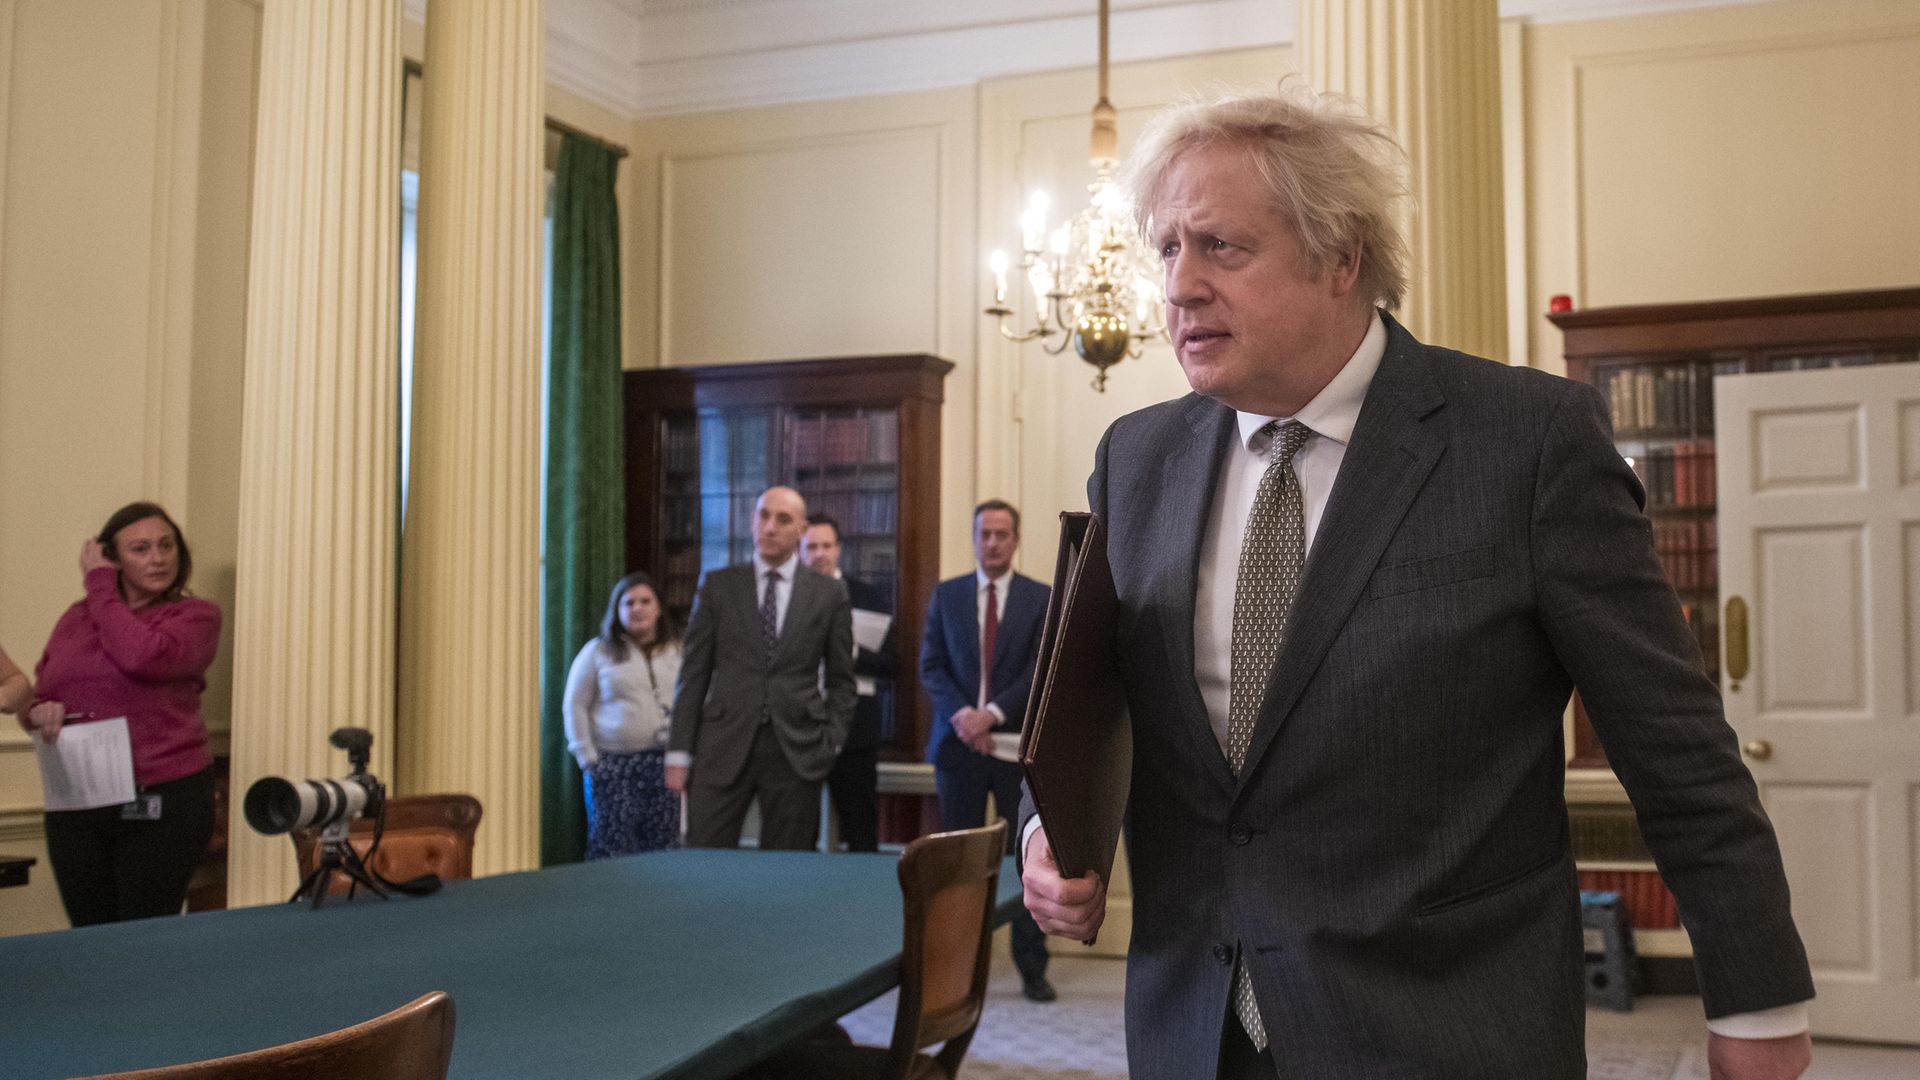 Prime Minister Boris Johnson arriving in the Cabinet Room, Downing Street - Credit: PA